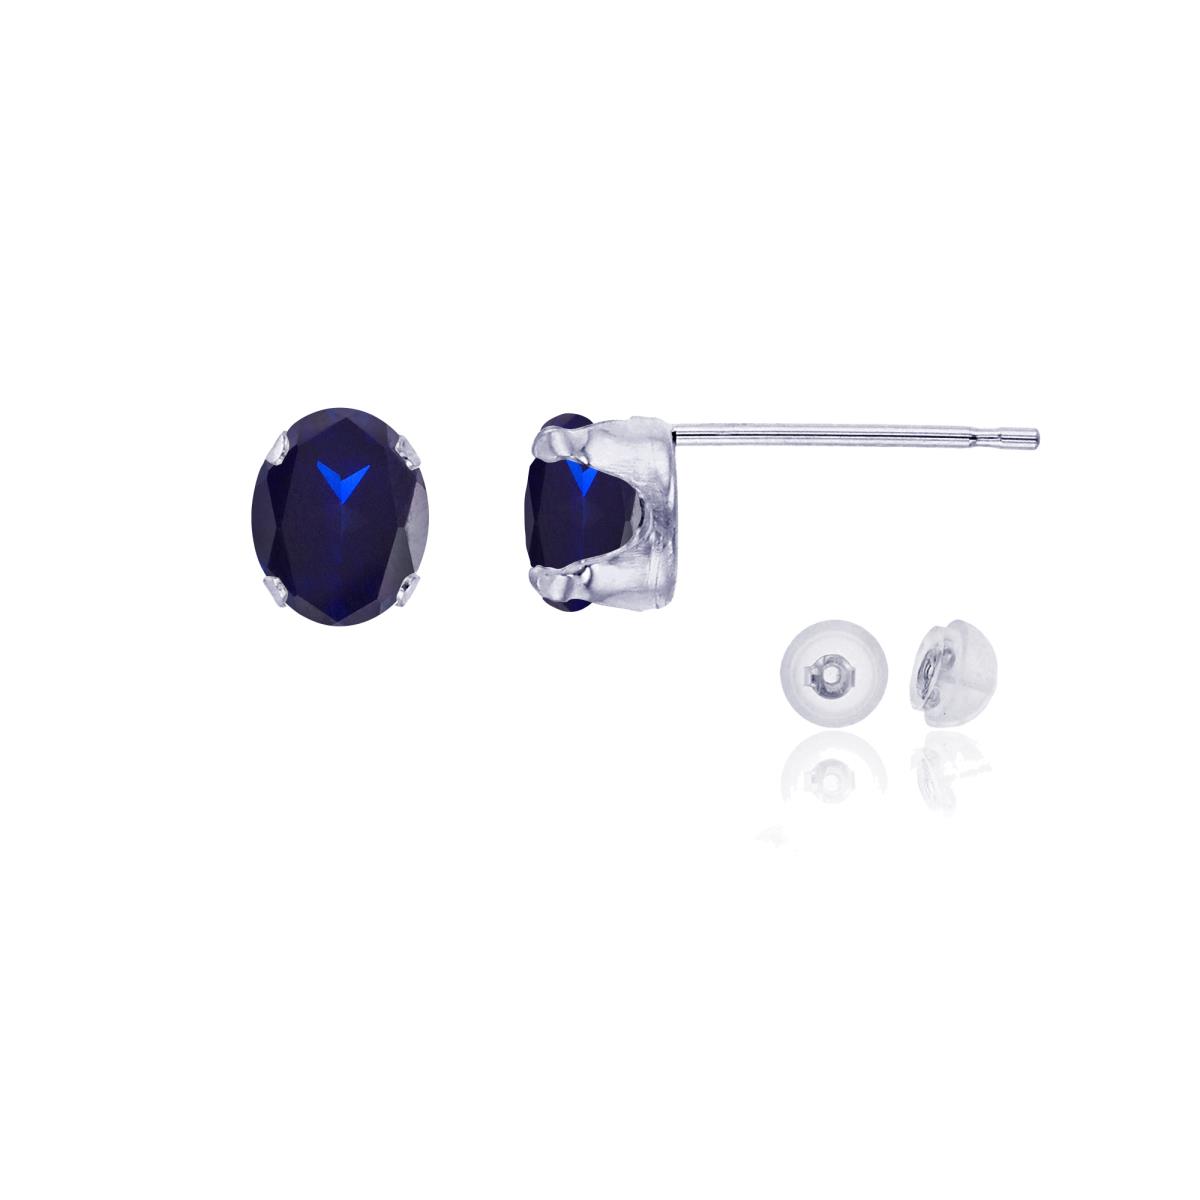 14K White Gold 6x4mm Oval Cr Blue Sapphire Stud Earring with Silicone Back